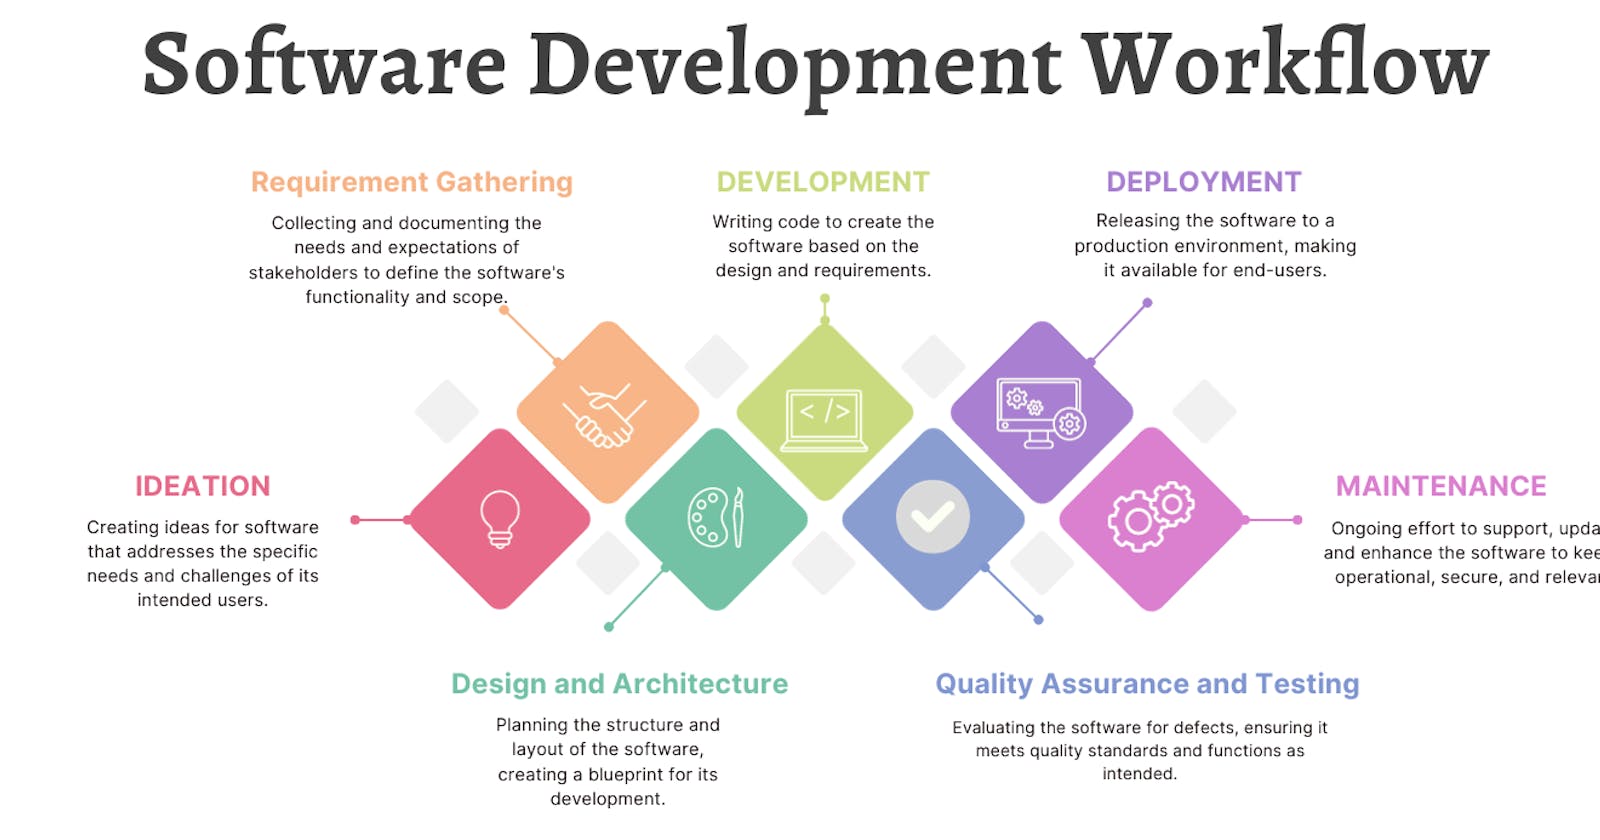 Effective Software Development Workflow: From Idea to Delivery